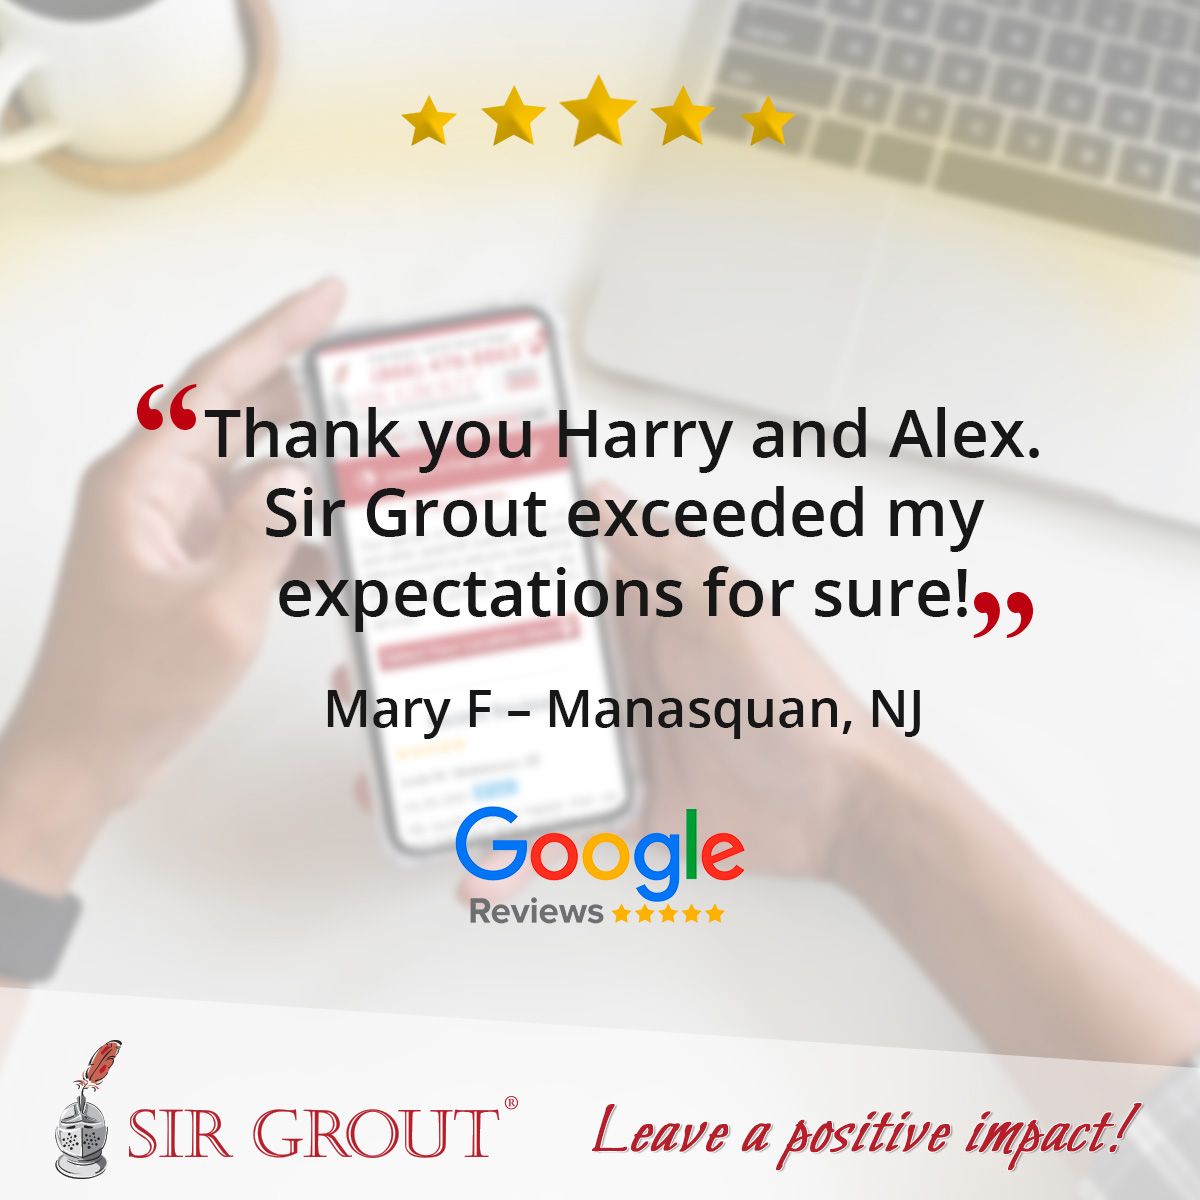 Thank you Harry and Alex. Sir Grout exceeded my expectations for sure!